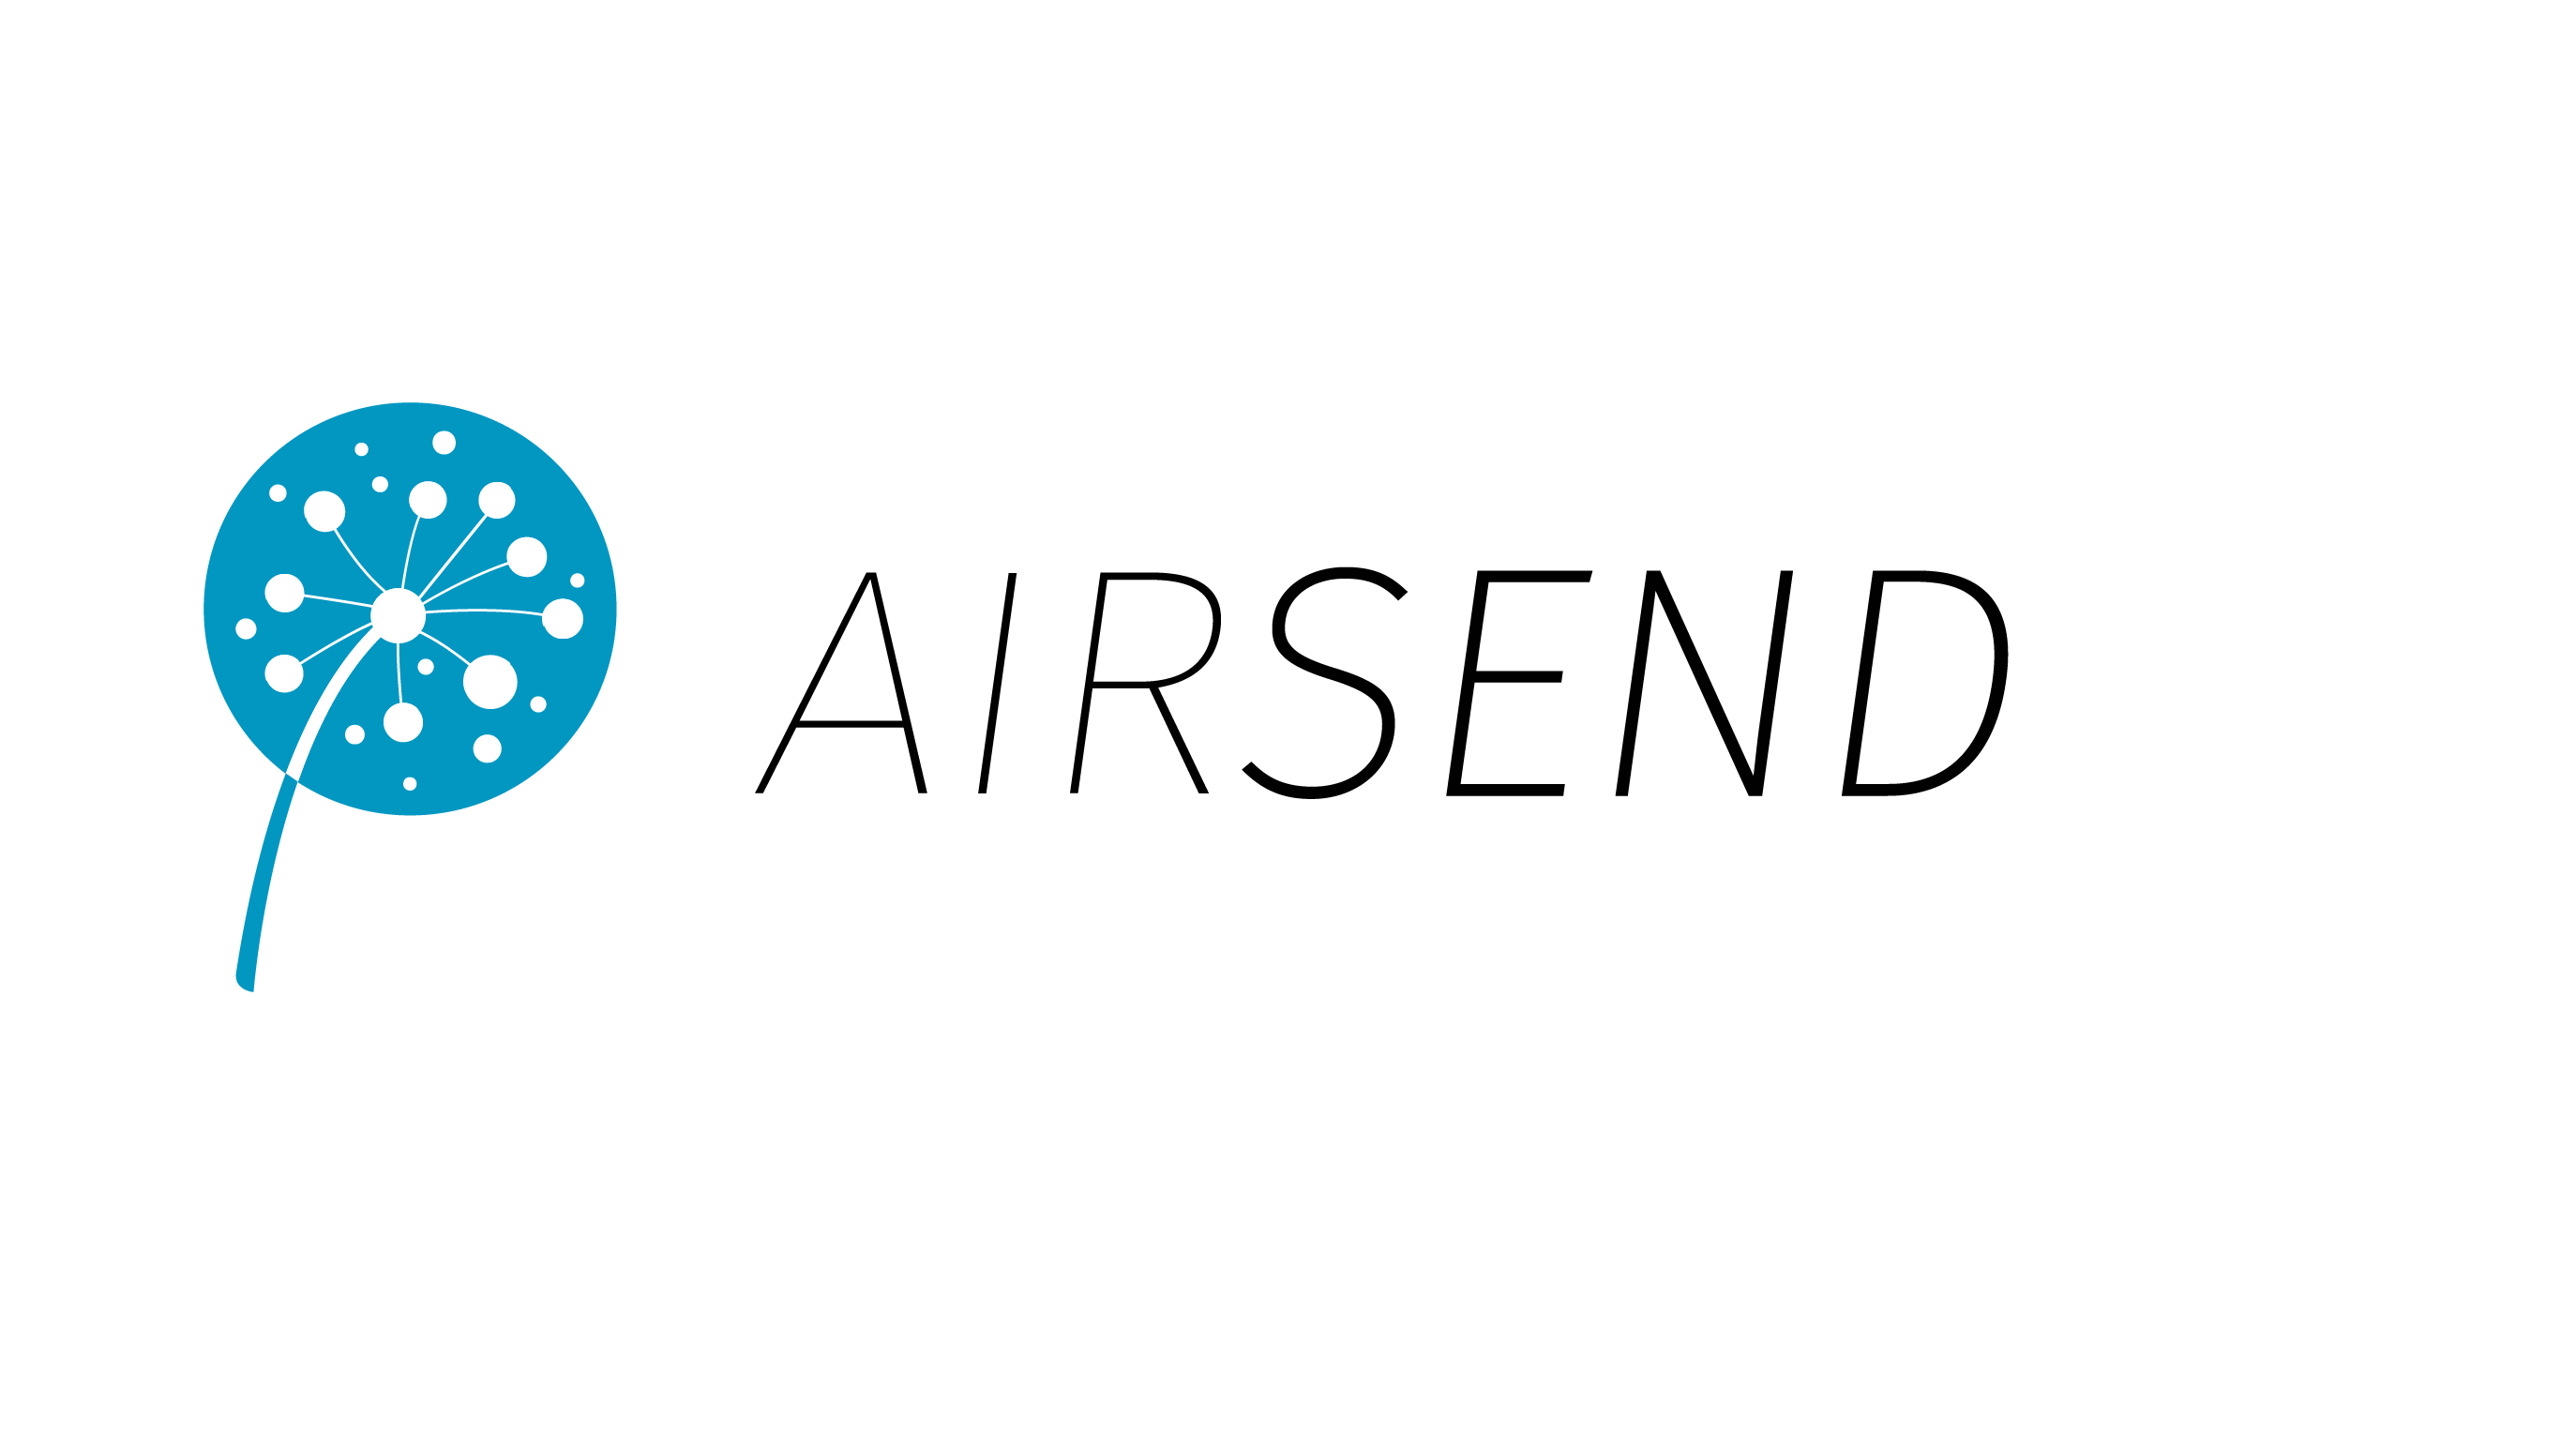 Setting up an AirSend account - AirSend - FileCloud Support